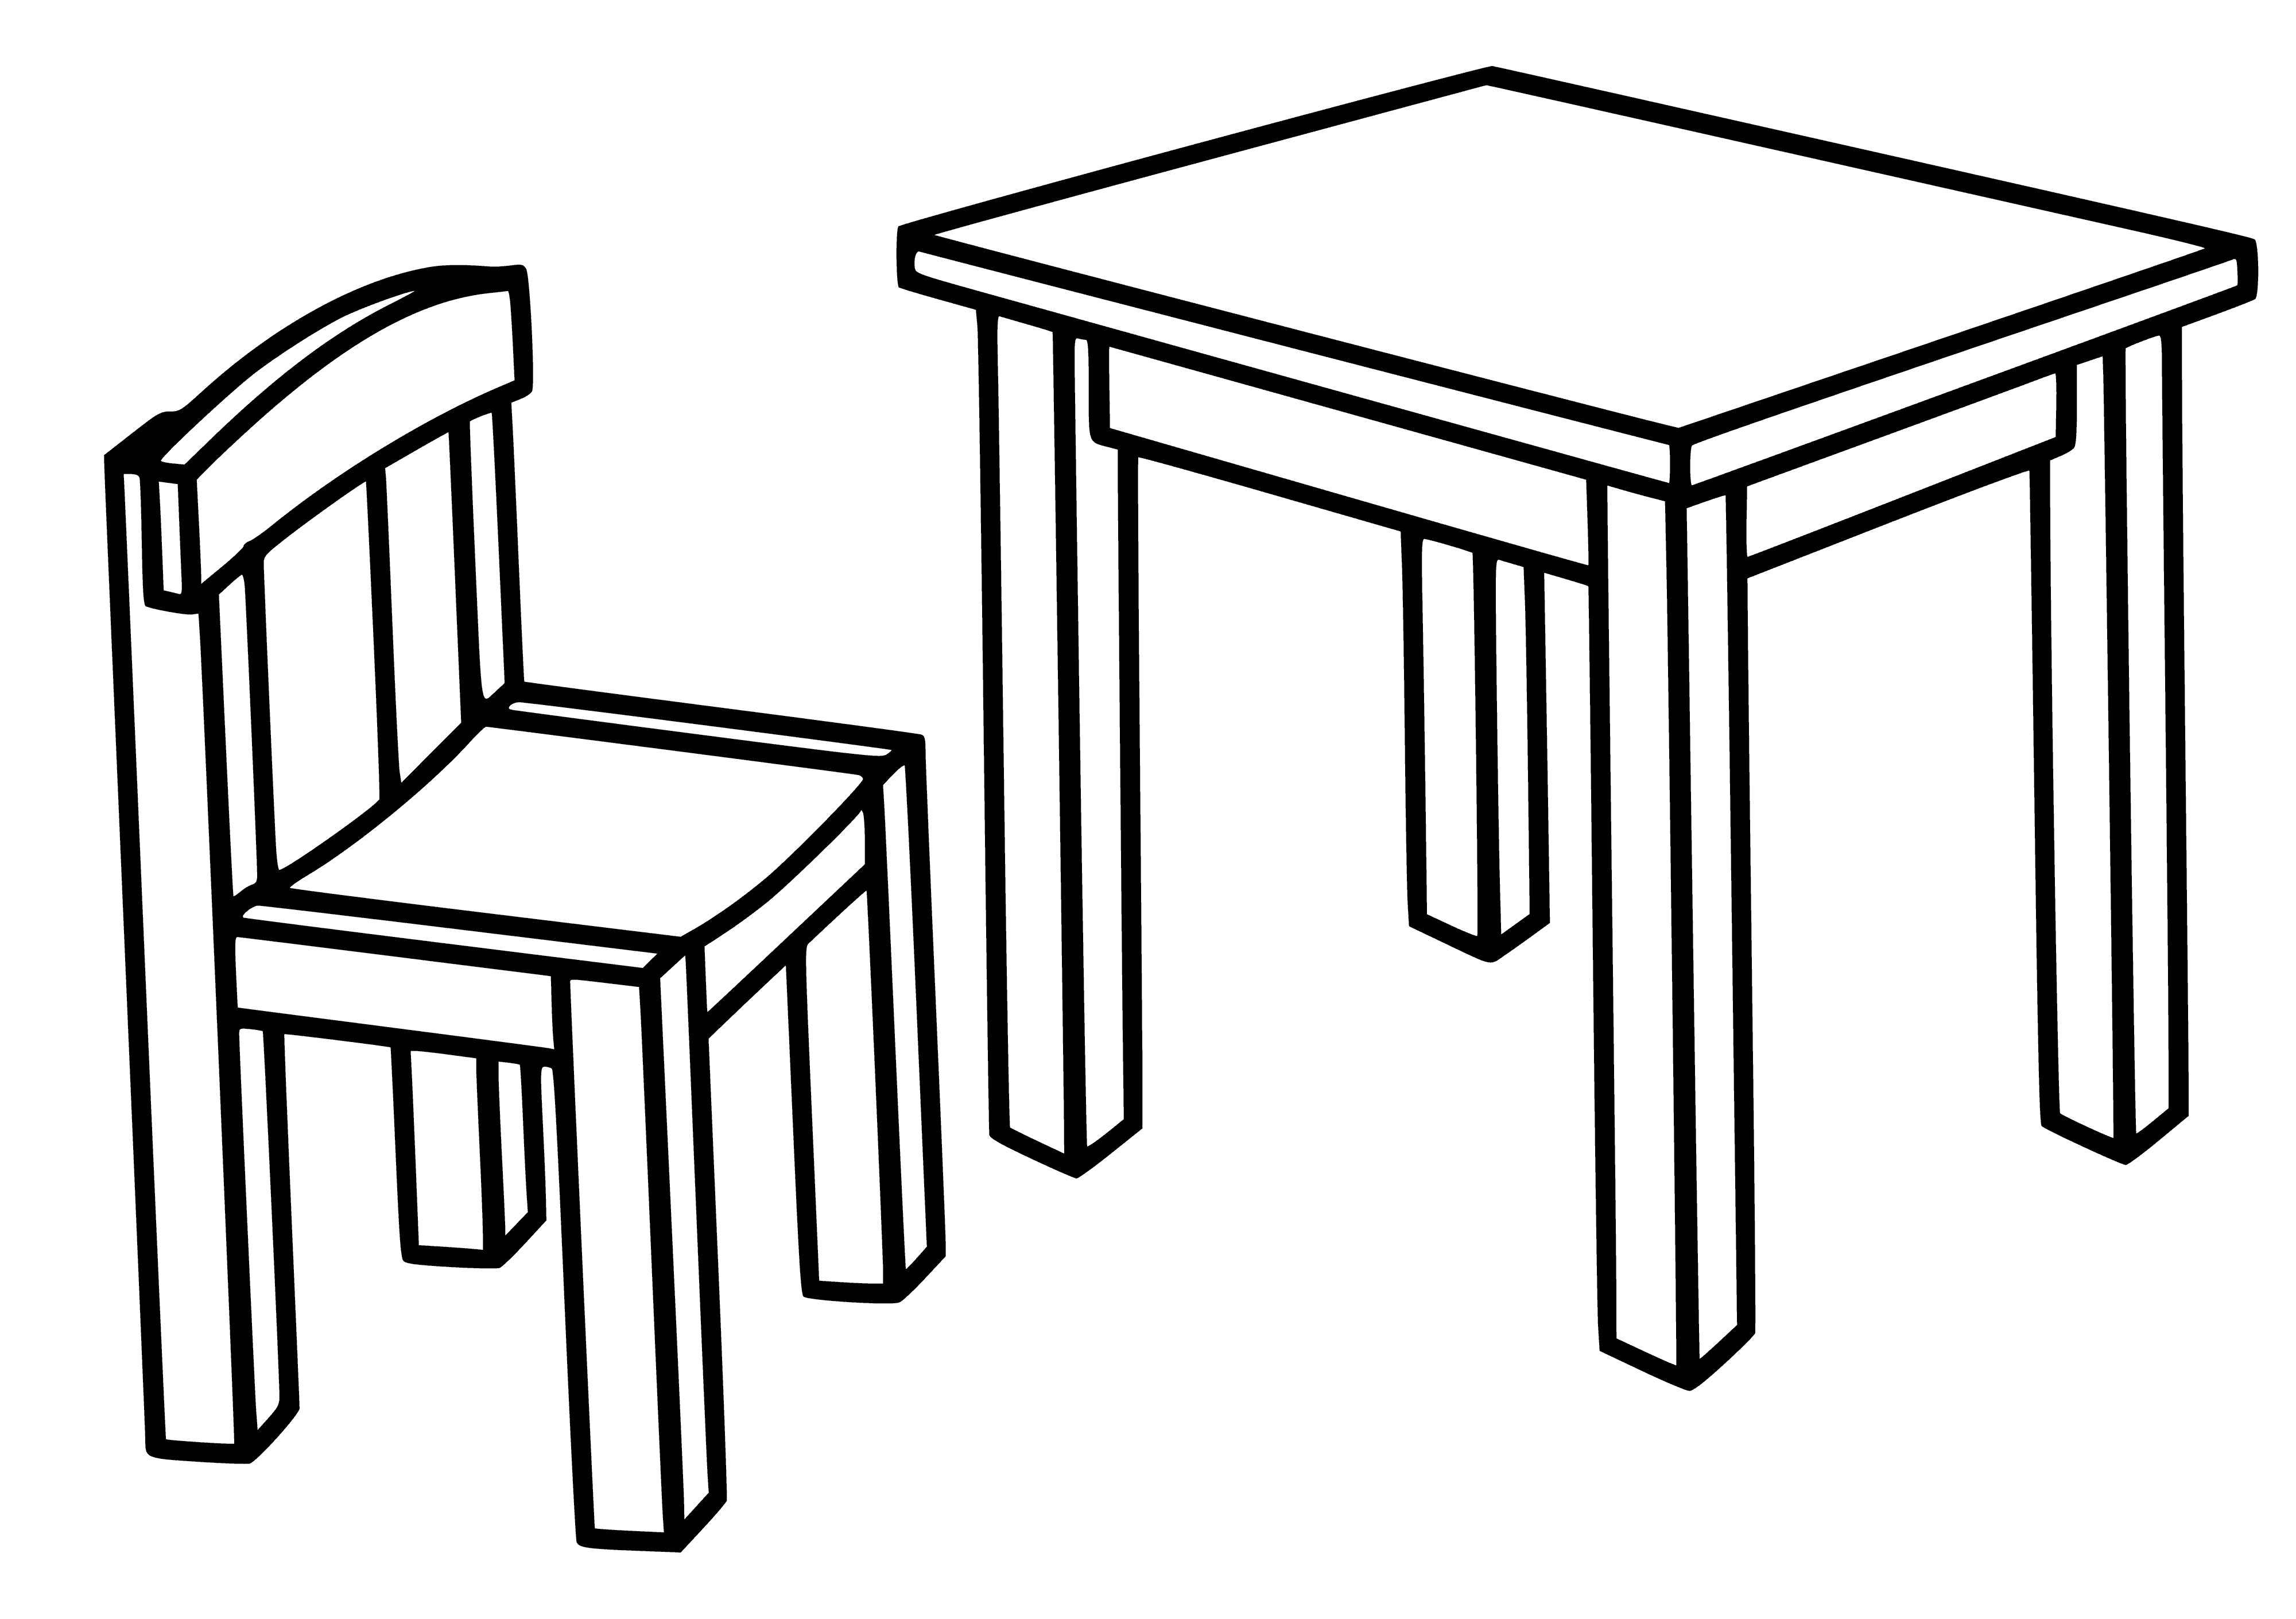 Furniture coloring page